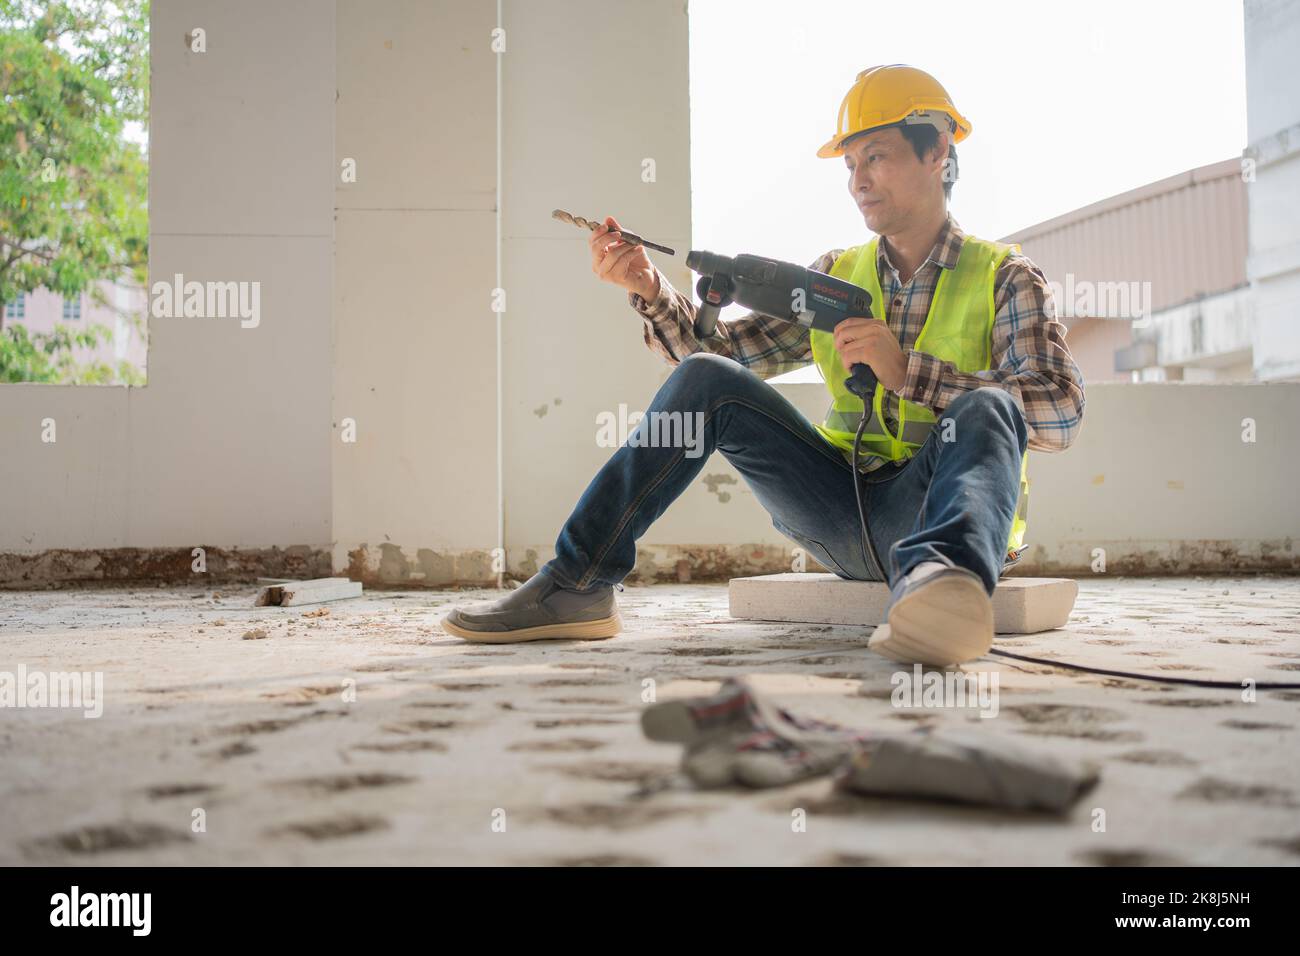 Construction worker Using an electric jackhammer to drill perforator equipment making holes before pouring the floor to be strong at construction site Stock Photo